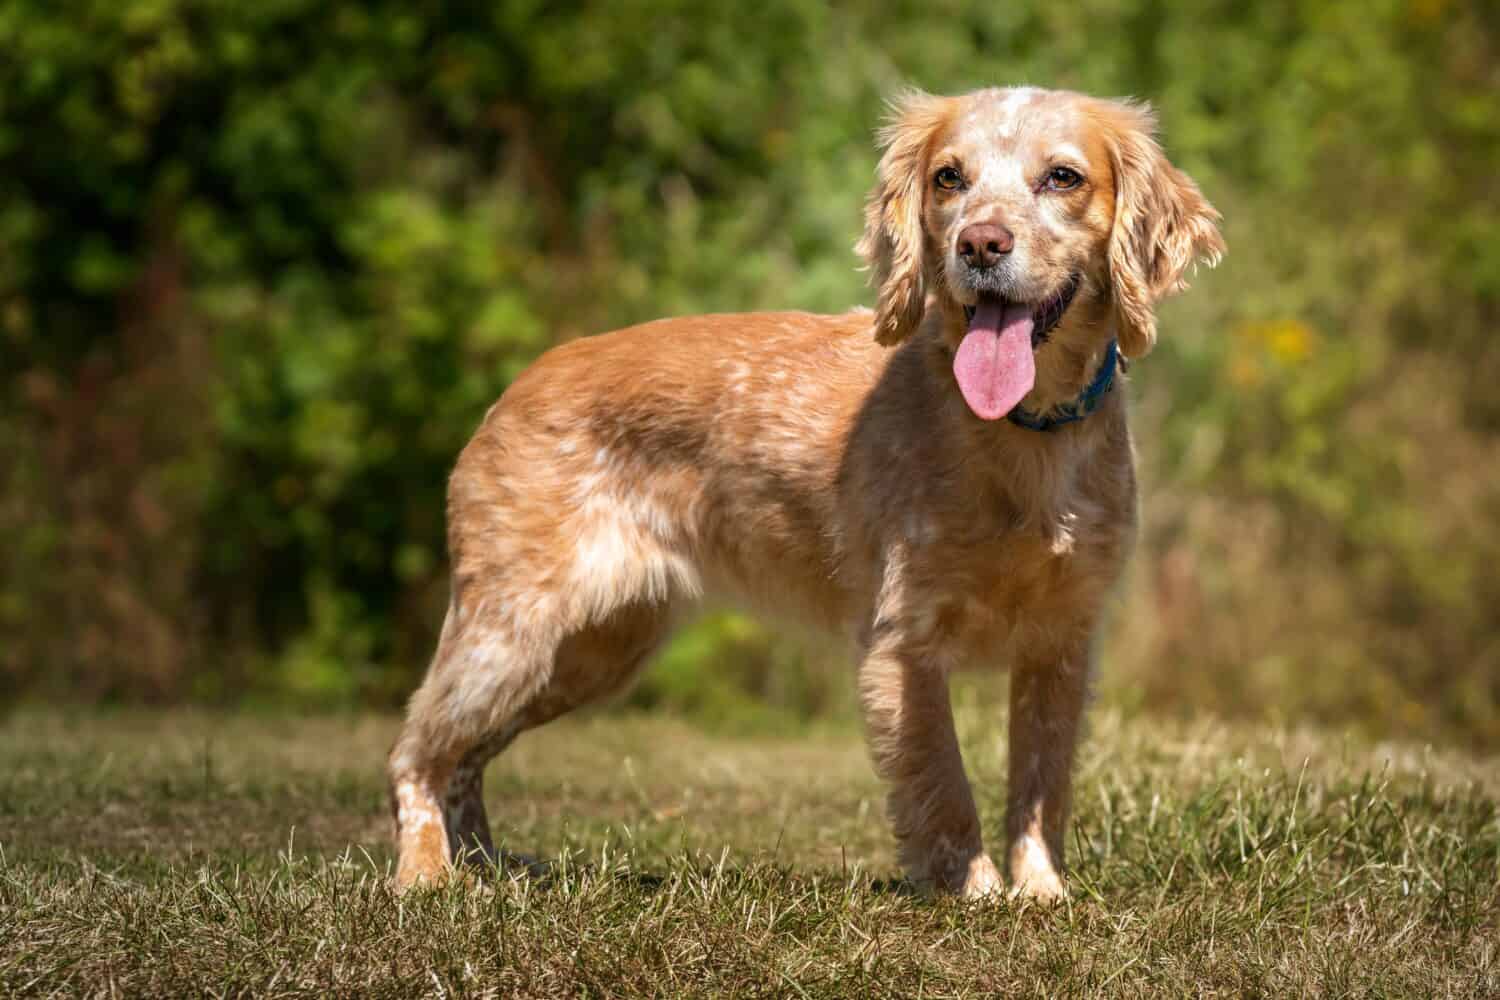 Working Cocker Spaniel Lemon Roan standing with her tongue out in a field on a sunny day